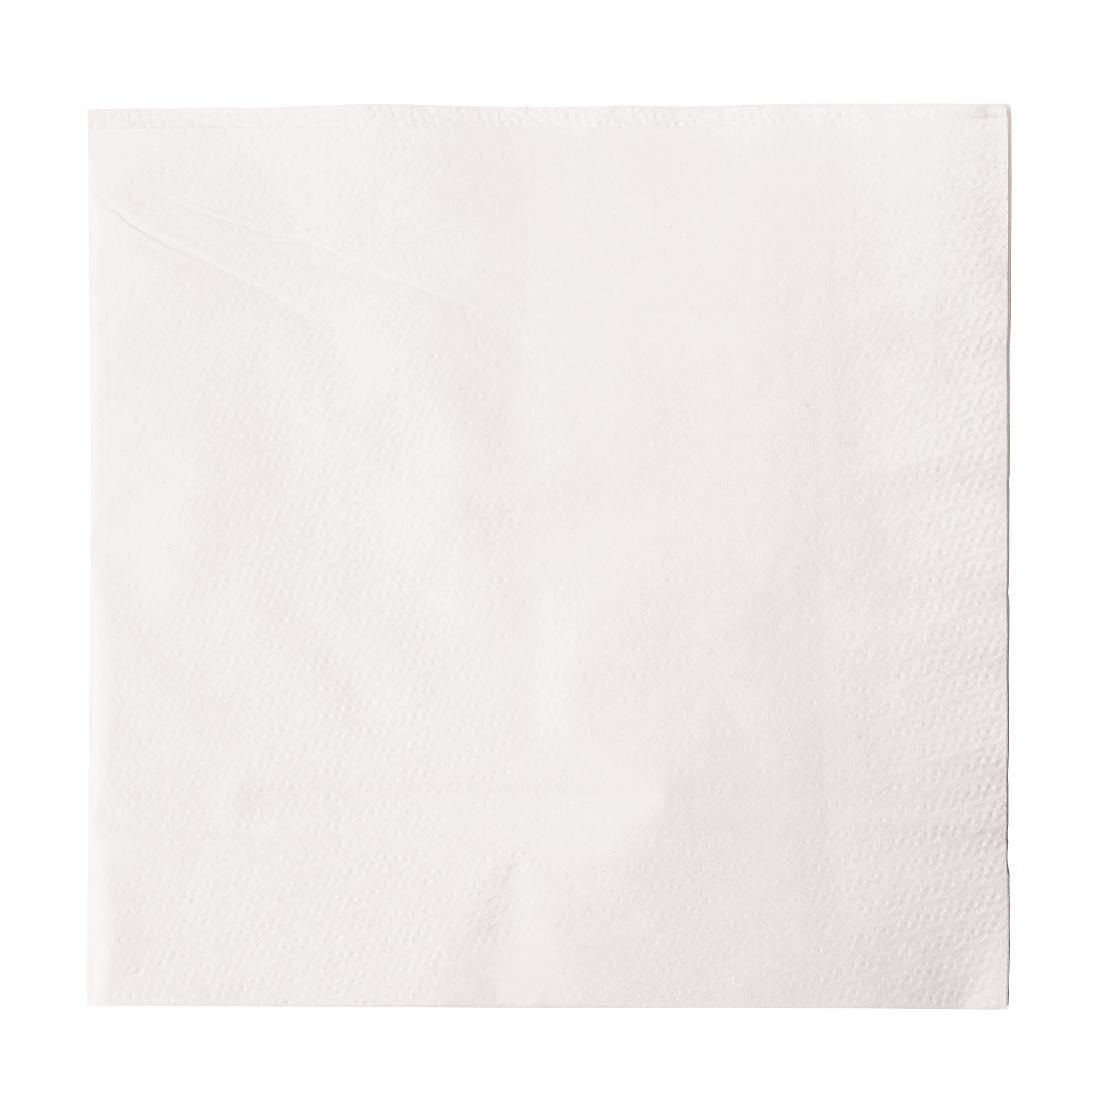 GG996 White Lunch Napkins 330 x 330mm (Pack of 5000)